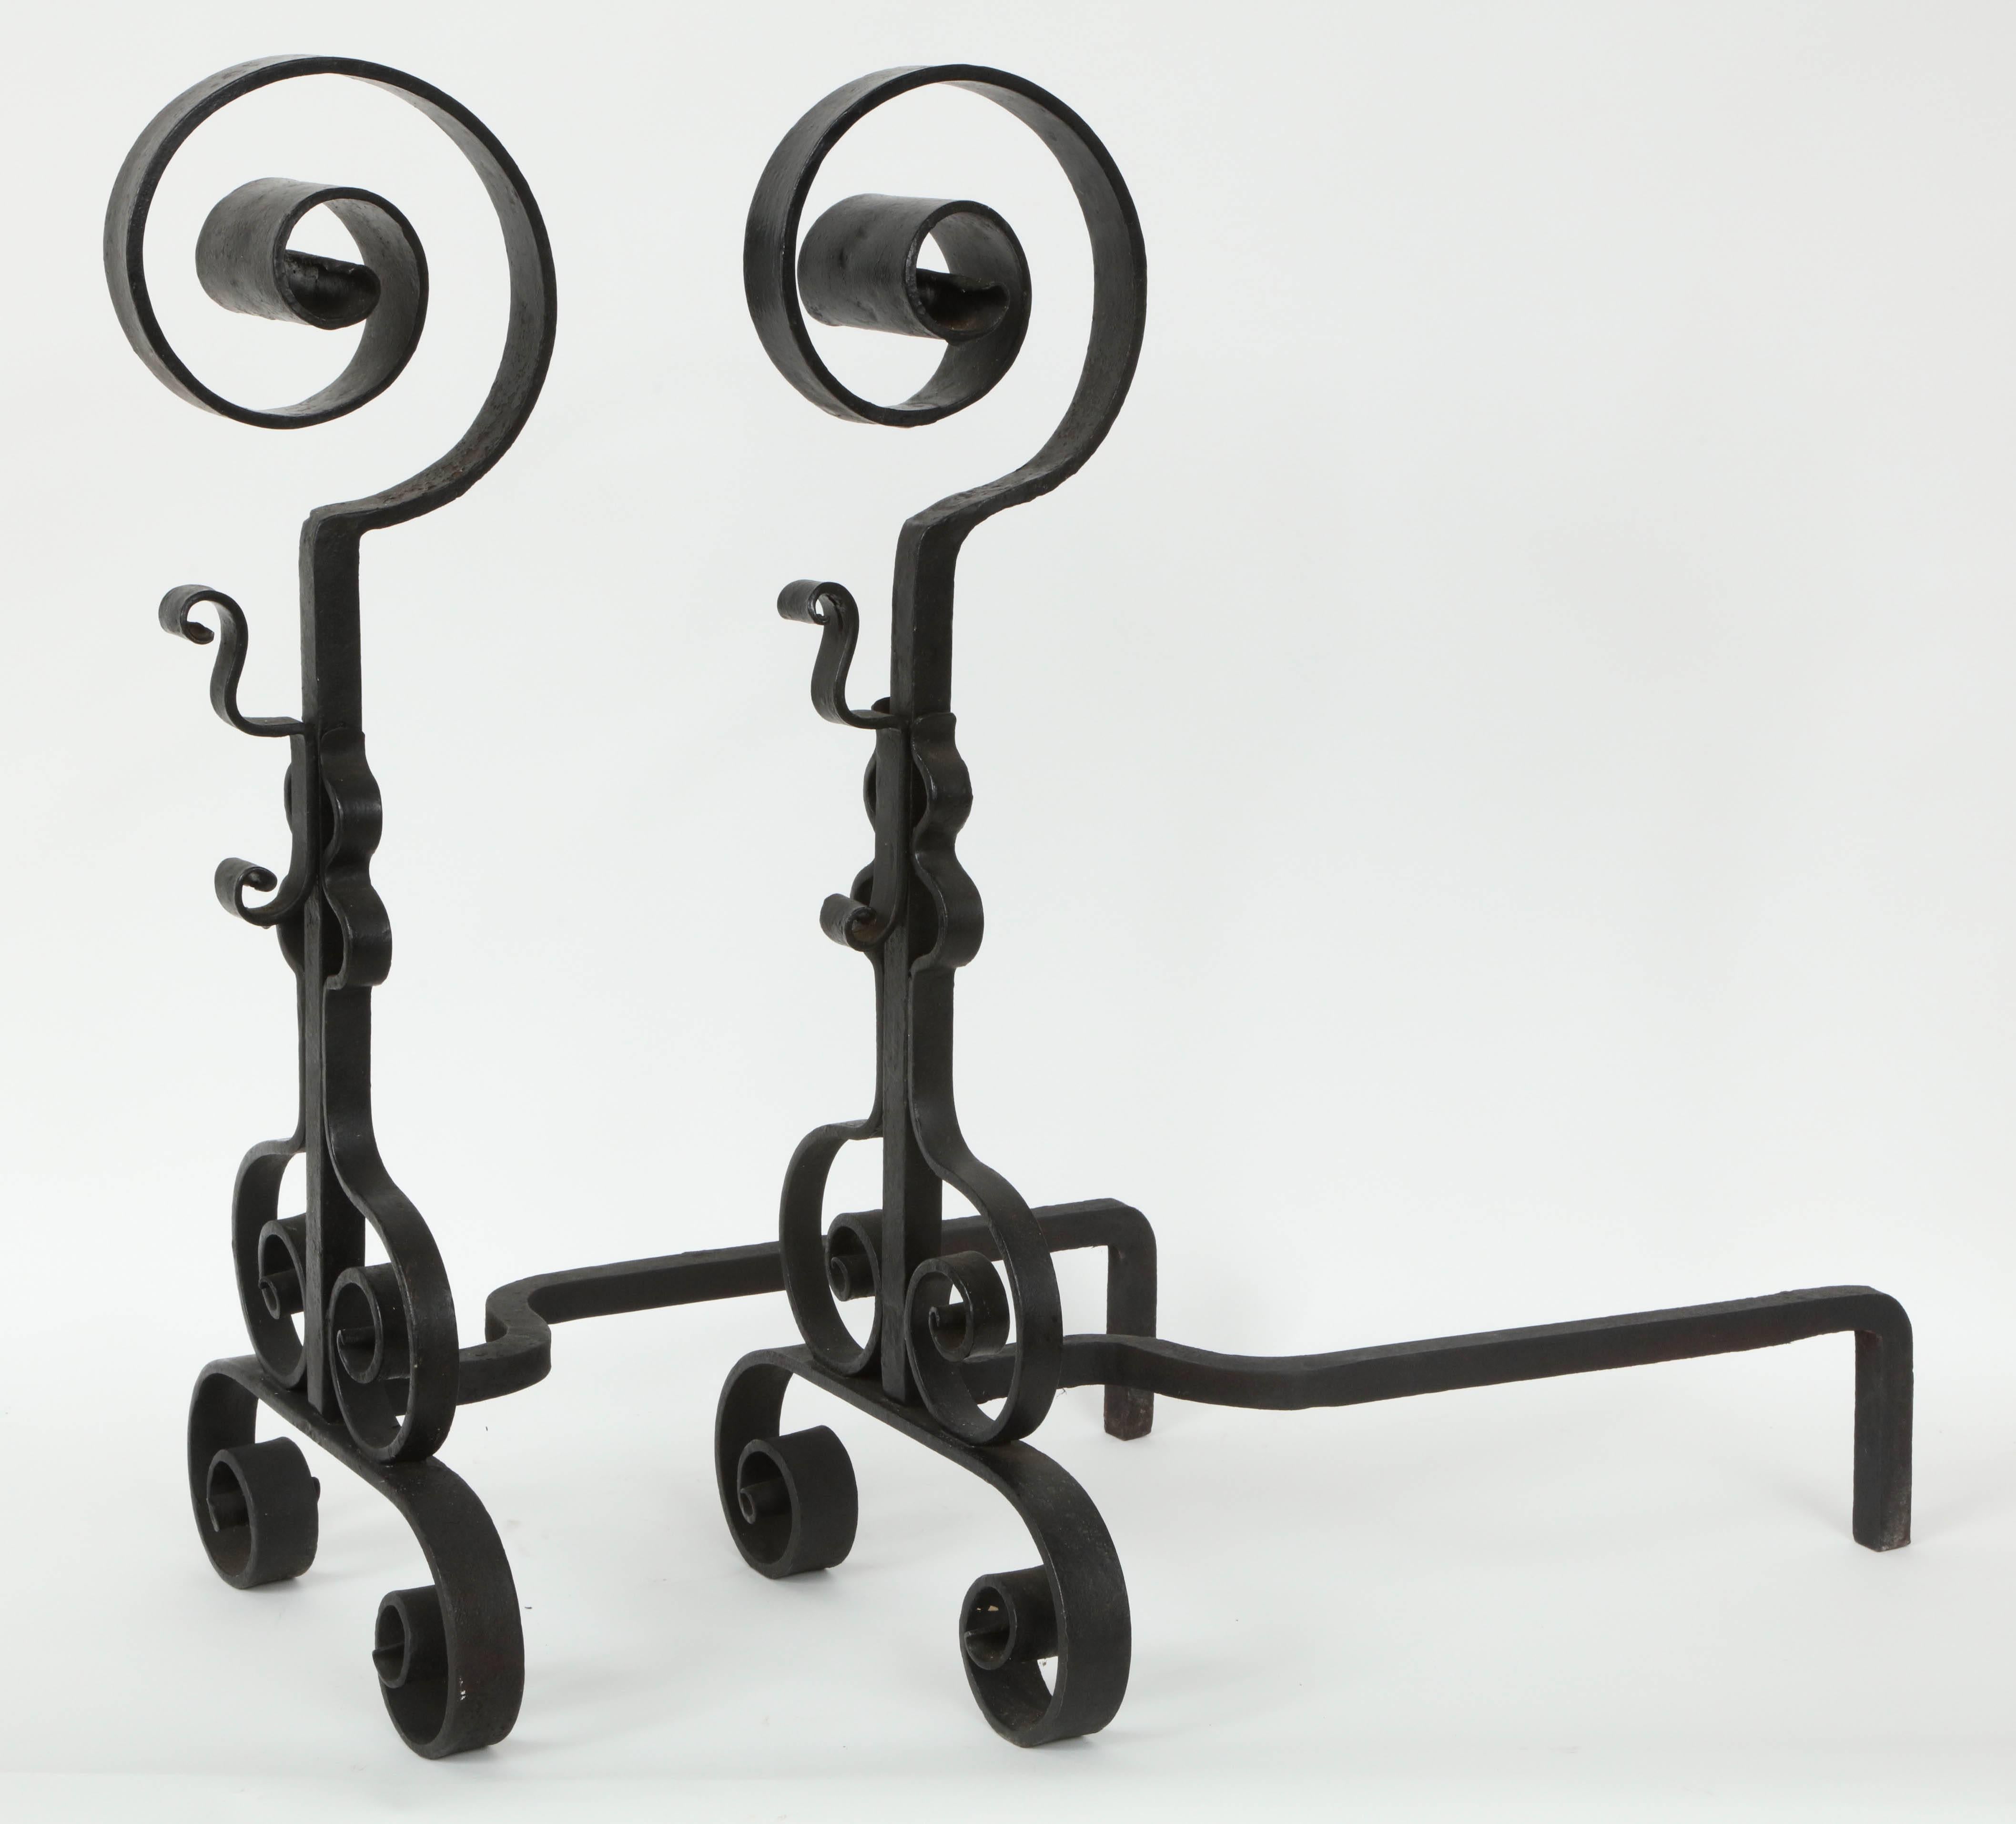 Fantastic pair of hand-forged blackened wrought iron andirons with curled metal details.